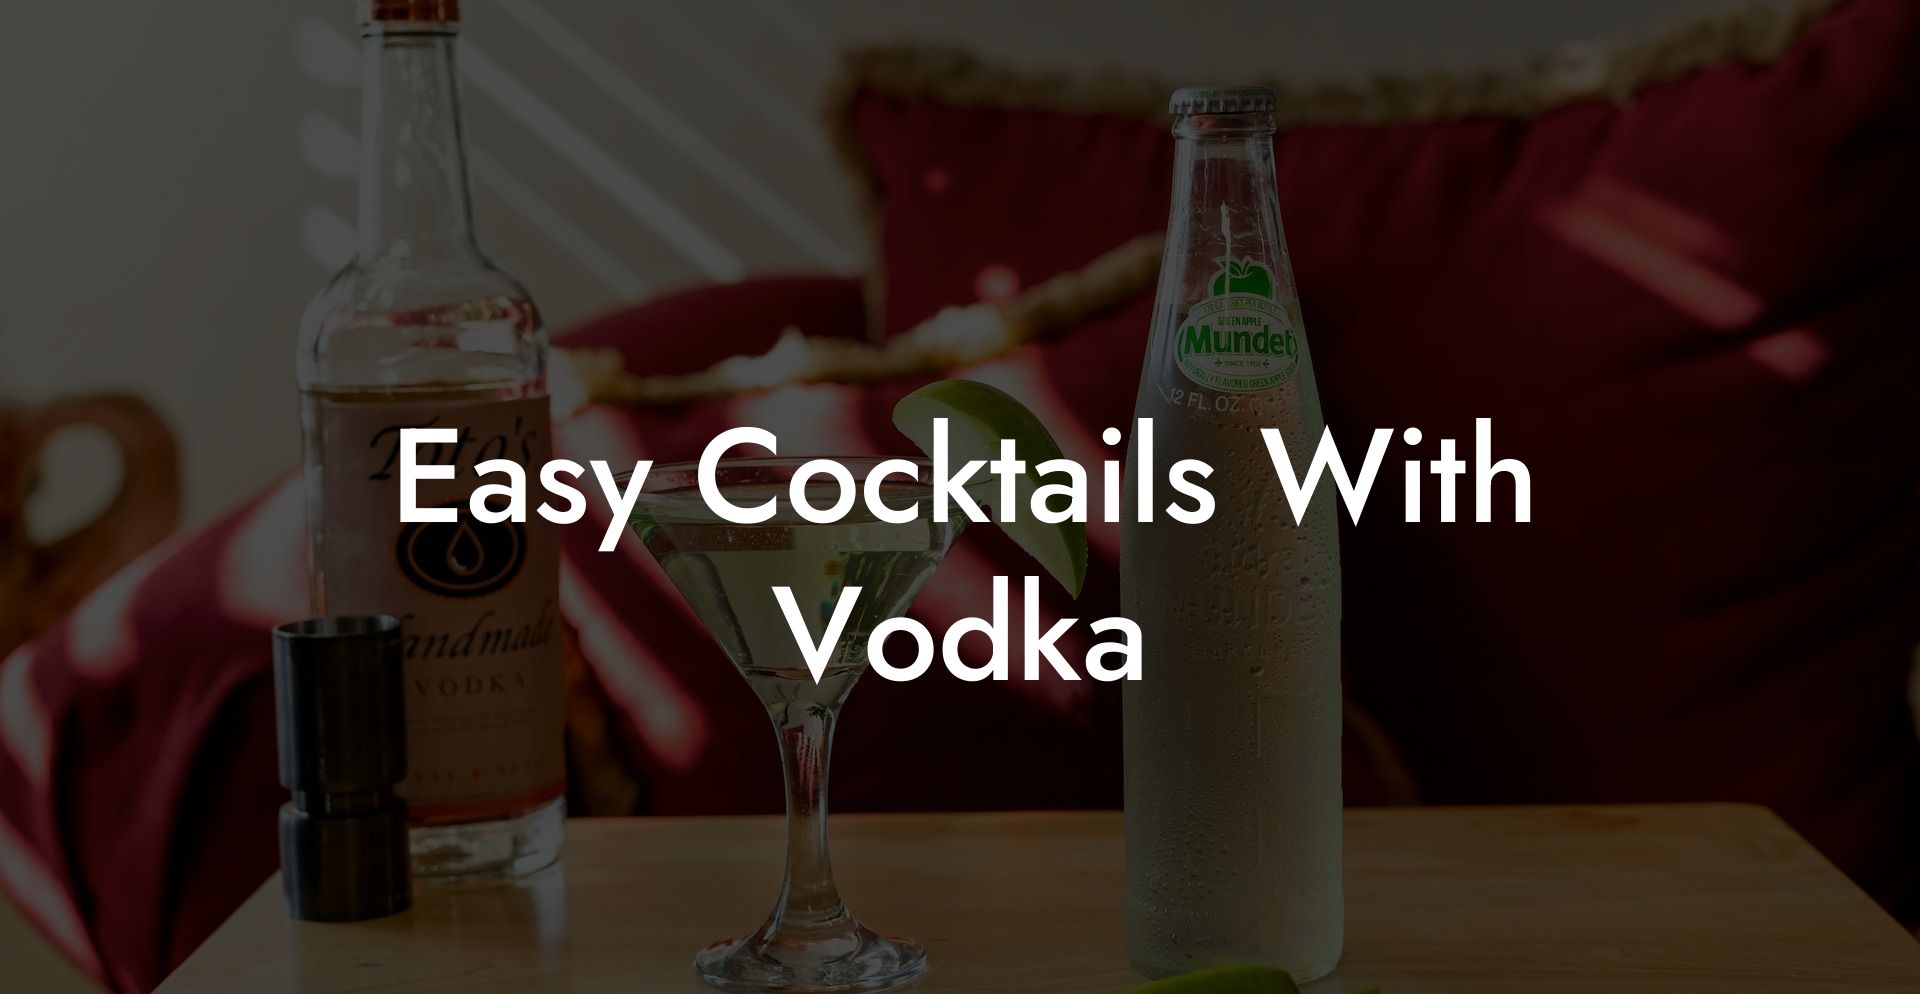 Easy Cocktails With Vodka